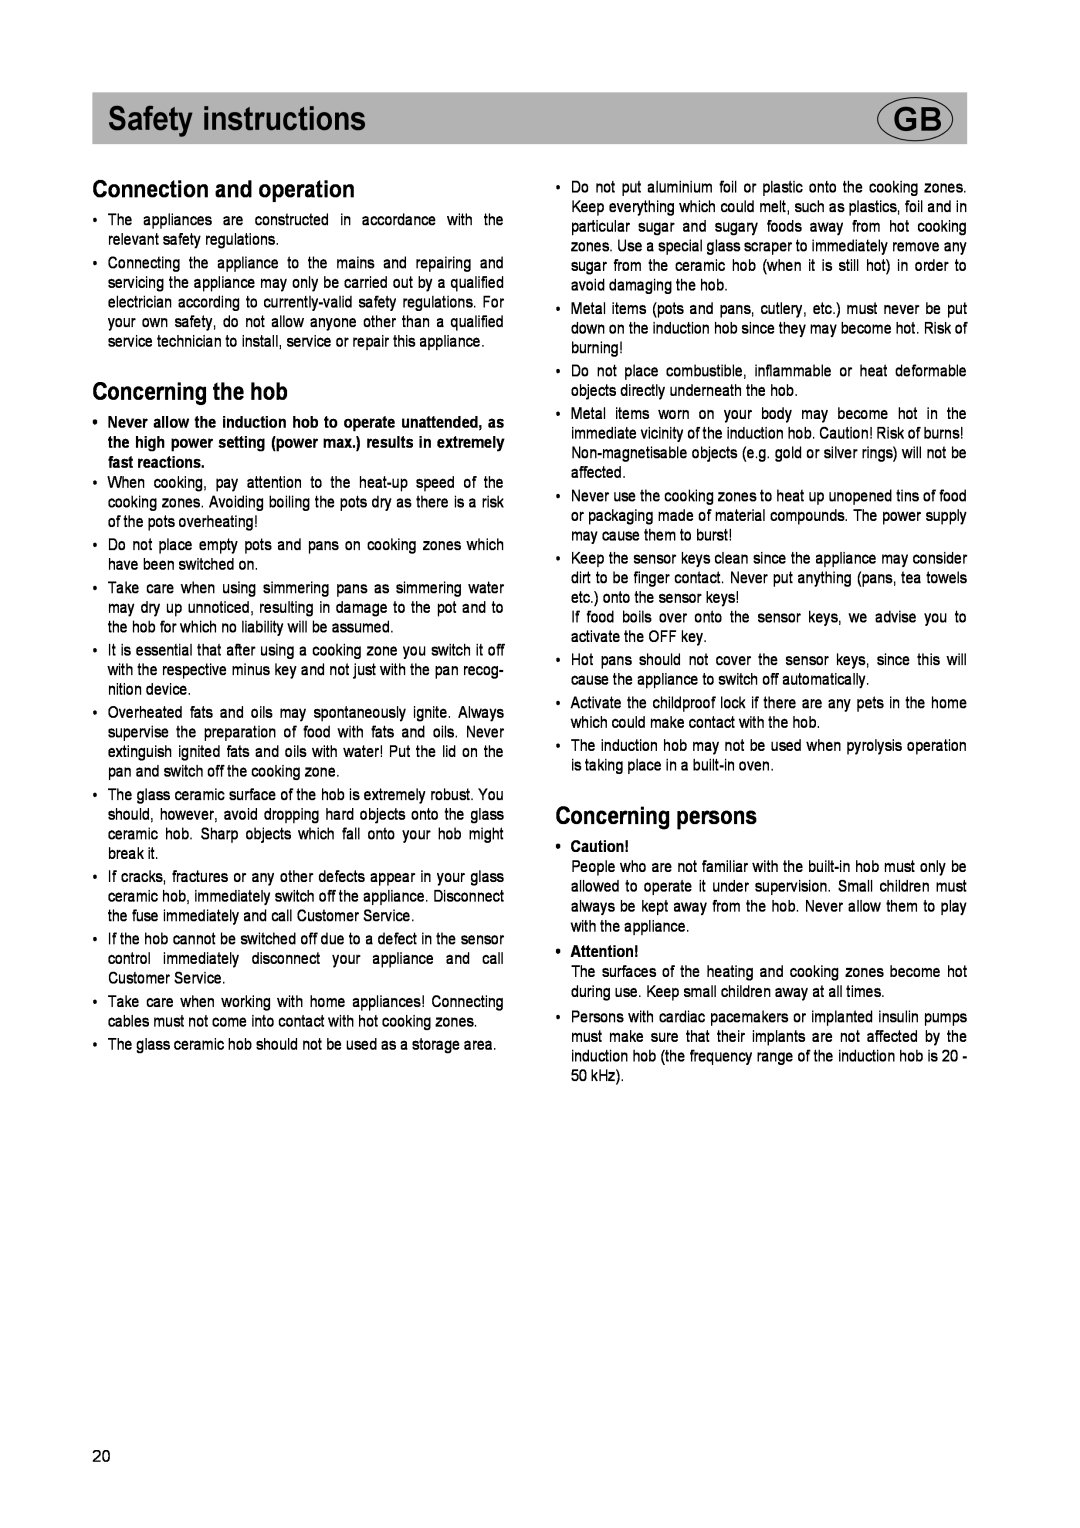 Kuppersbusch USA EKI 607.2 Safety instructions, Connection and operation, Concerning the hob, Concerning persons 